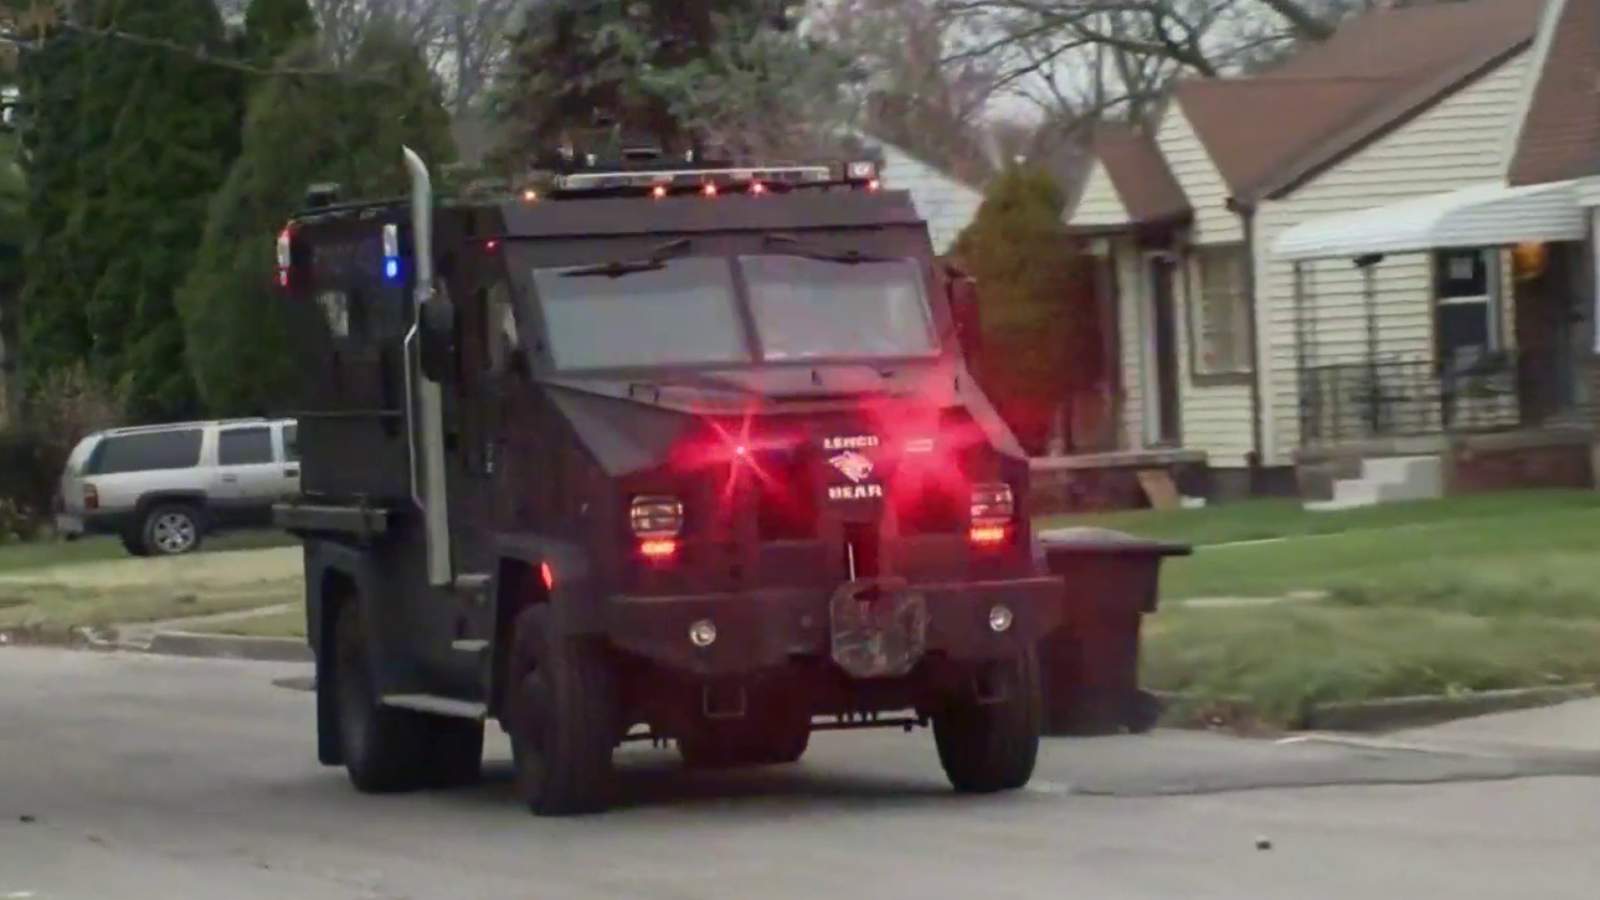 Detroit police investigate possible connection between barricaded situation, injured man dropped off at hospital